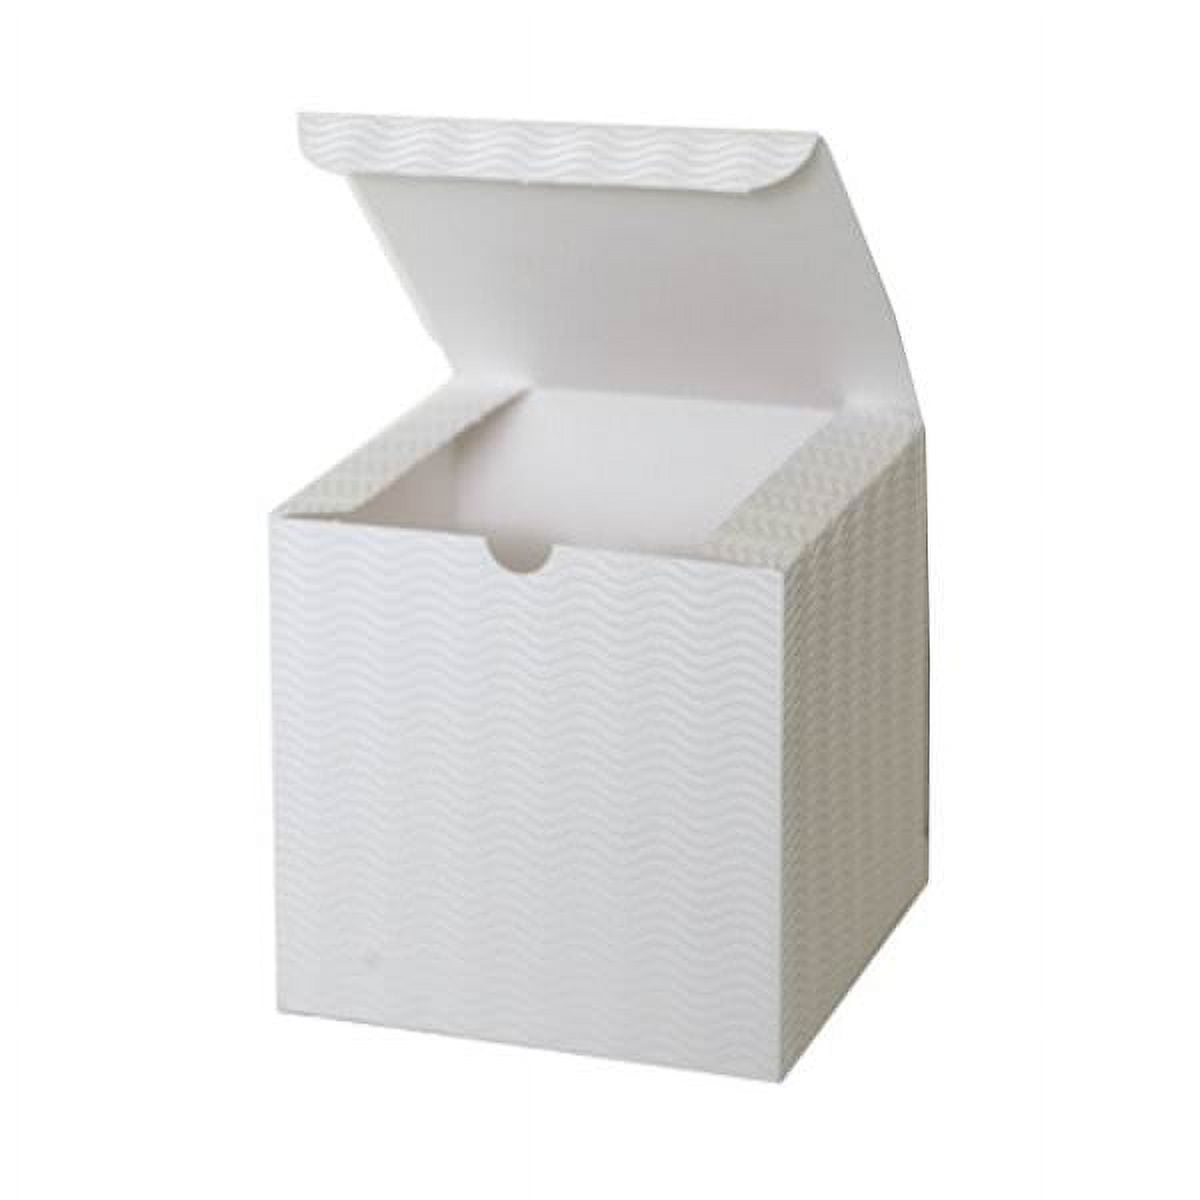 Shipkey 10pcs White Cardboard Gift Boxes with Lids |6x6x6 Inches Square Boxes for Party, Wedding, Christmas, Holidays and All Other Occasions, Size: 6